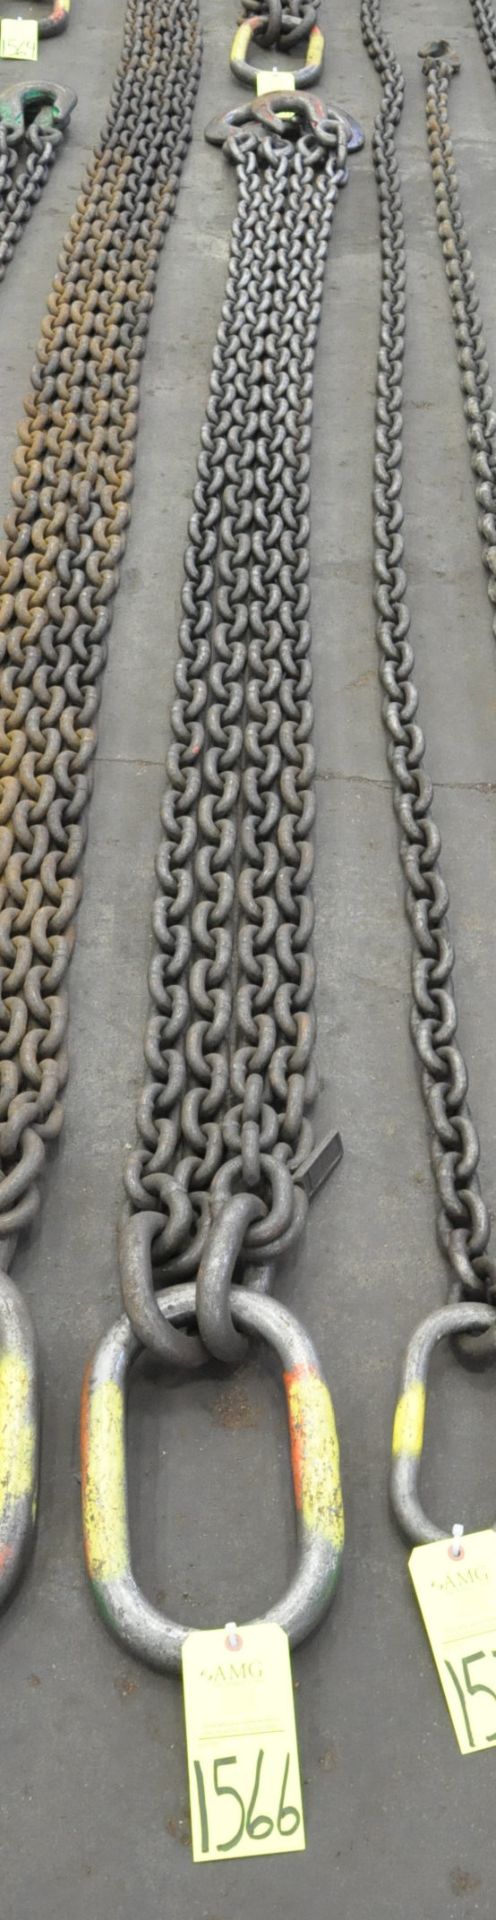 5/8" Link x 10' 6" Long 4-Hook Chain Sling, Cert Tag, (G-19), Yellow Tag)